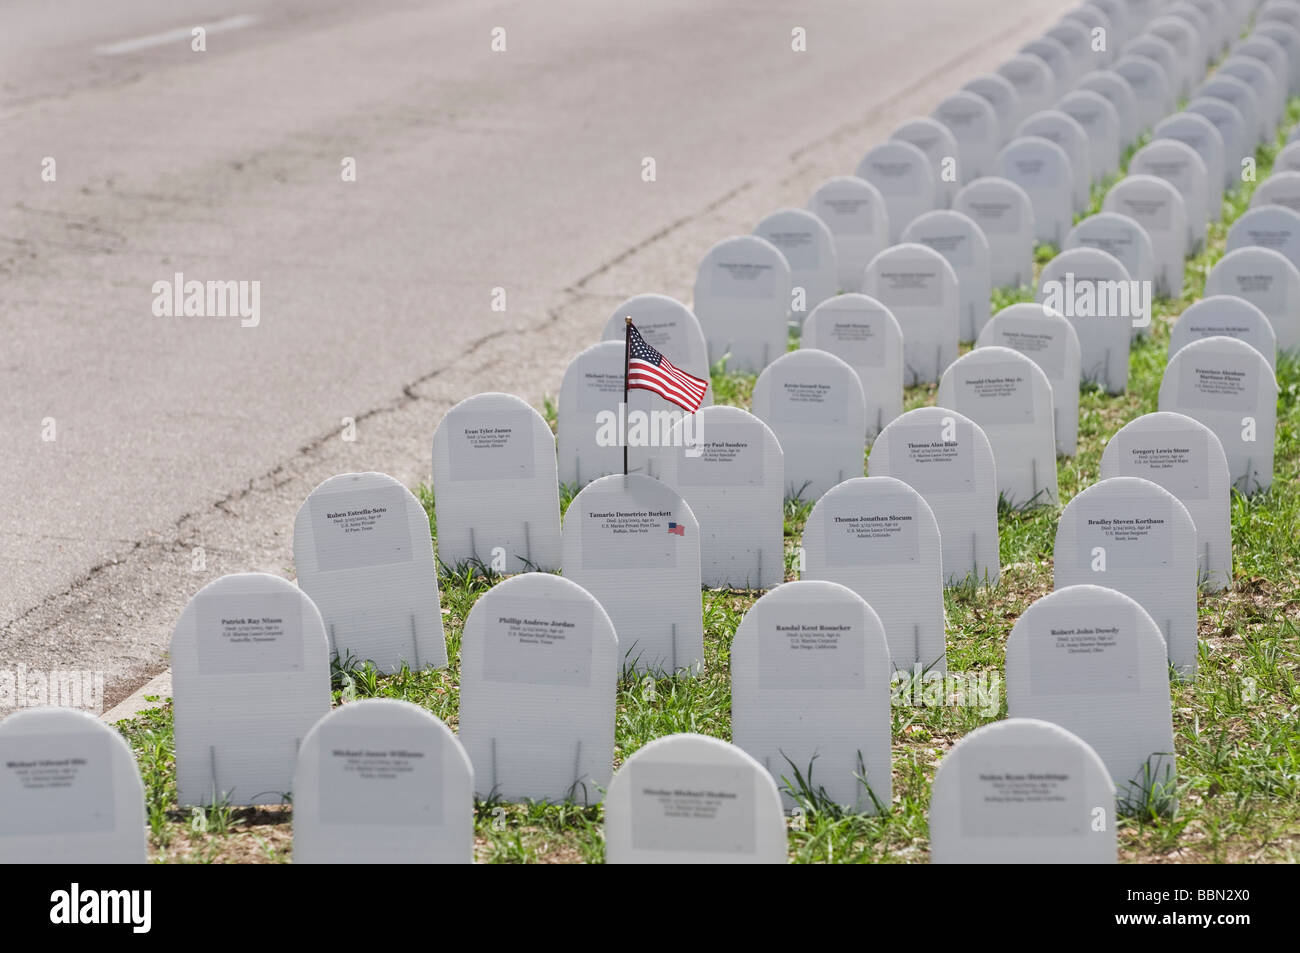 U.S. Memorial Day observance showing headstones representing fallen U.S. soldiers in war on terrorism in Iraq and Afghanistan. Stock Photo